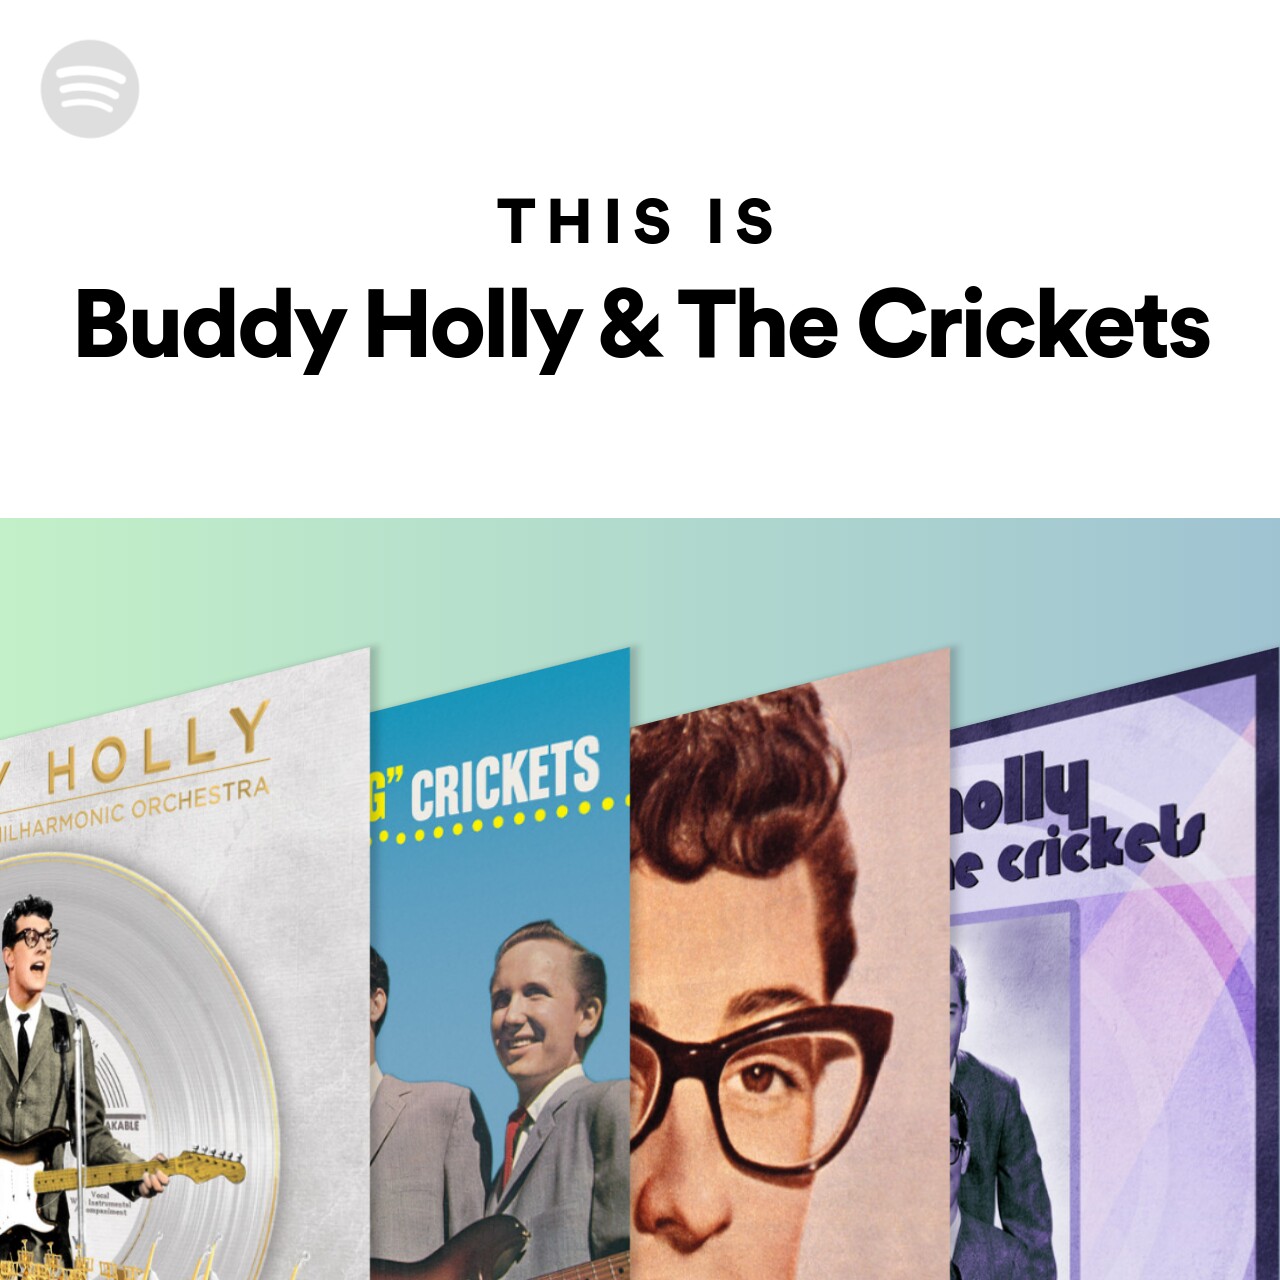 This Is Buddy Holly & The Crickets